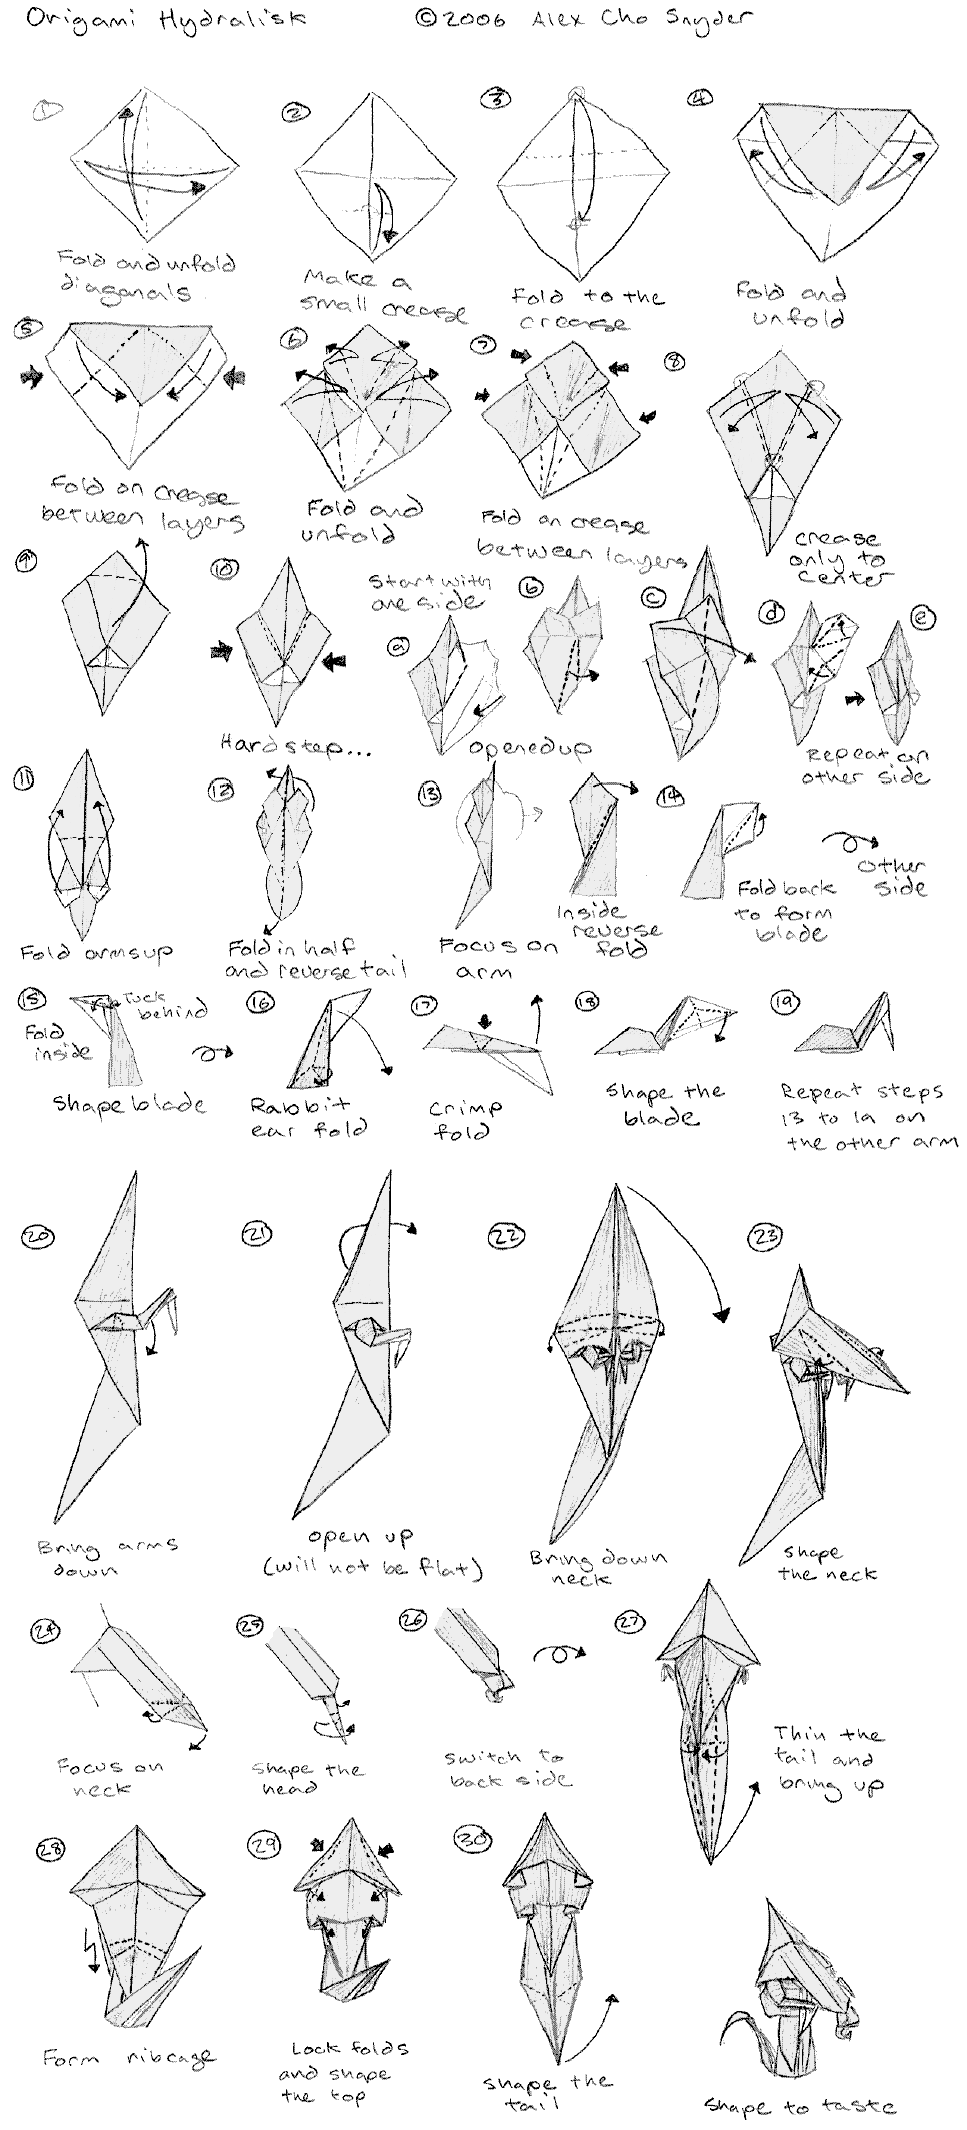 Origami Hydralisk Instructions